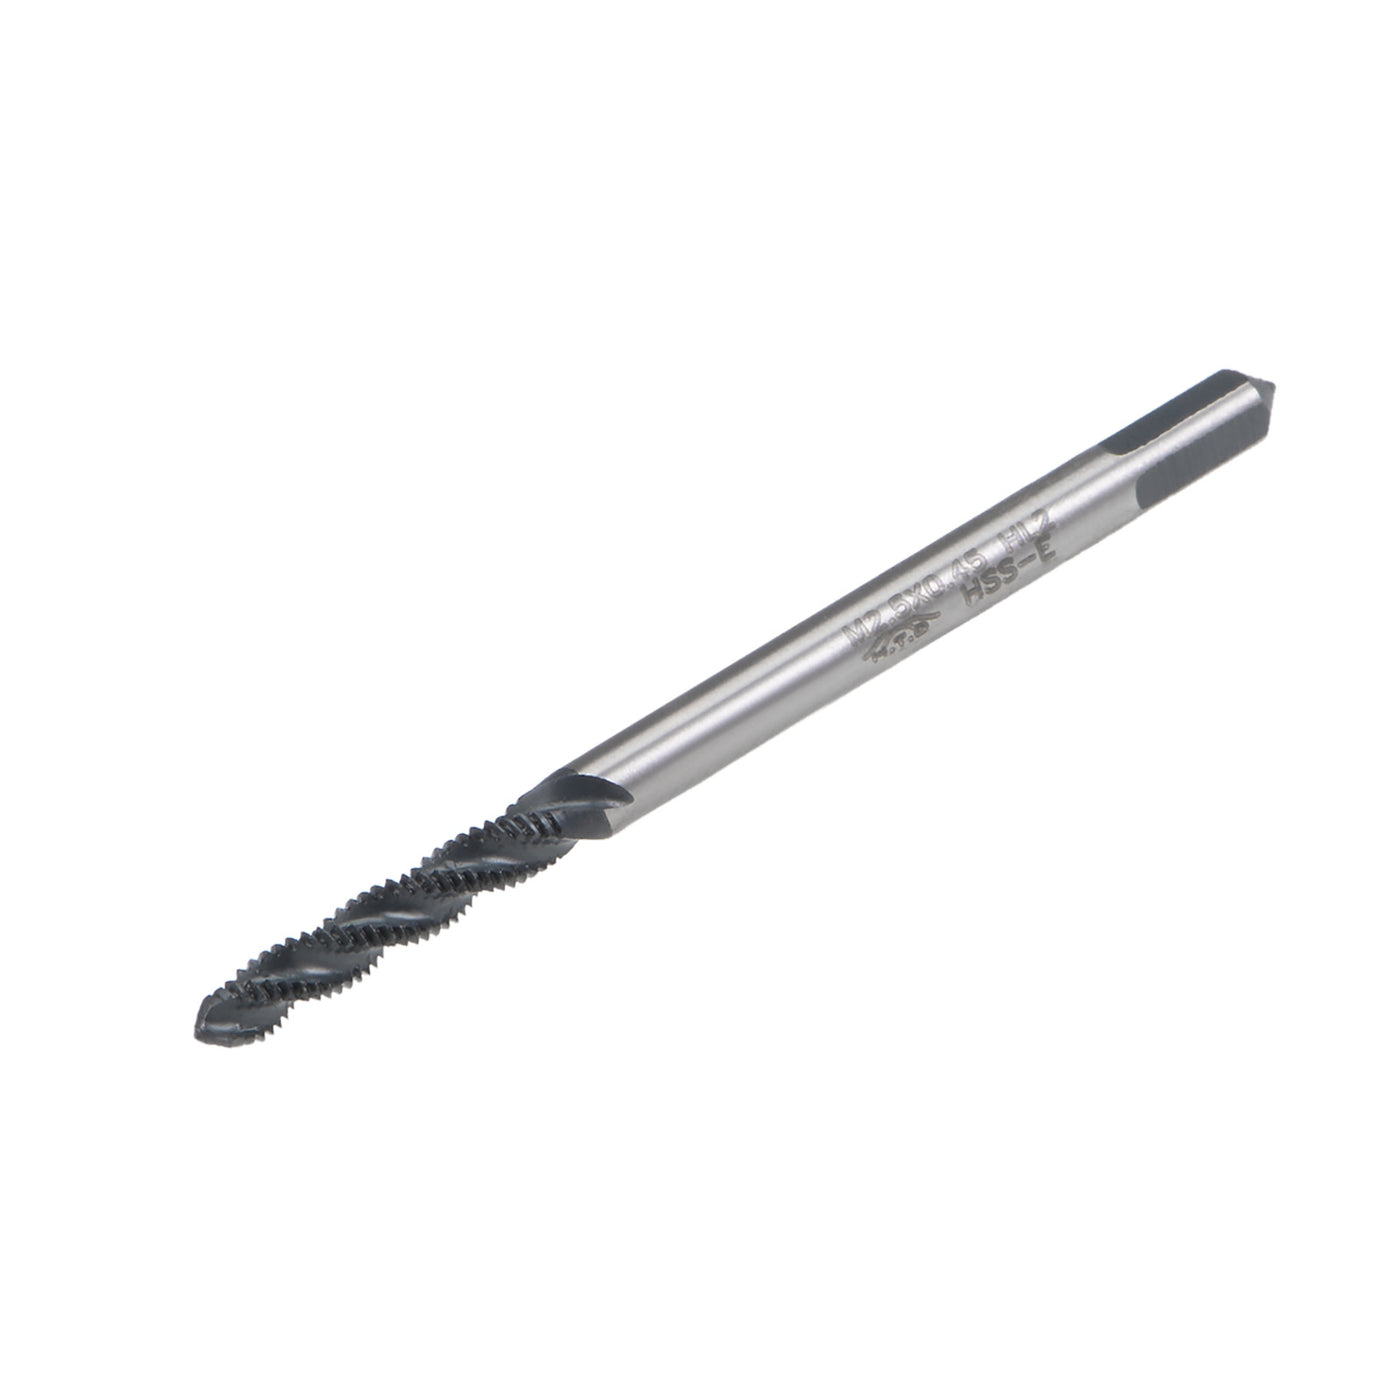 uxcell Uxcell M2.5 x 0.45 Spiral Flute Tap Metric Machine Thread Tap HSS Nitriding Coated